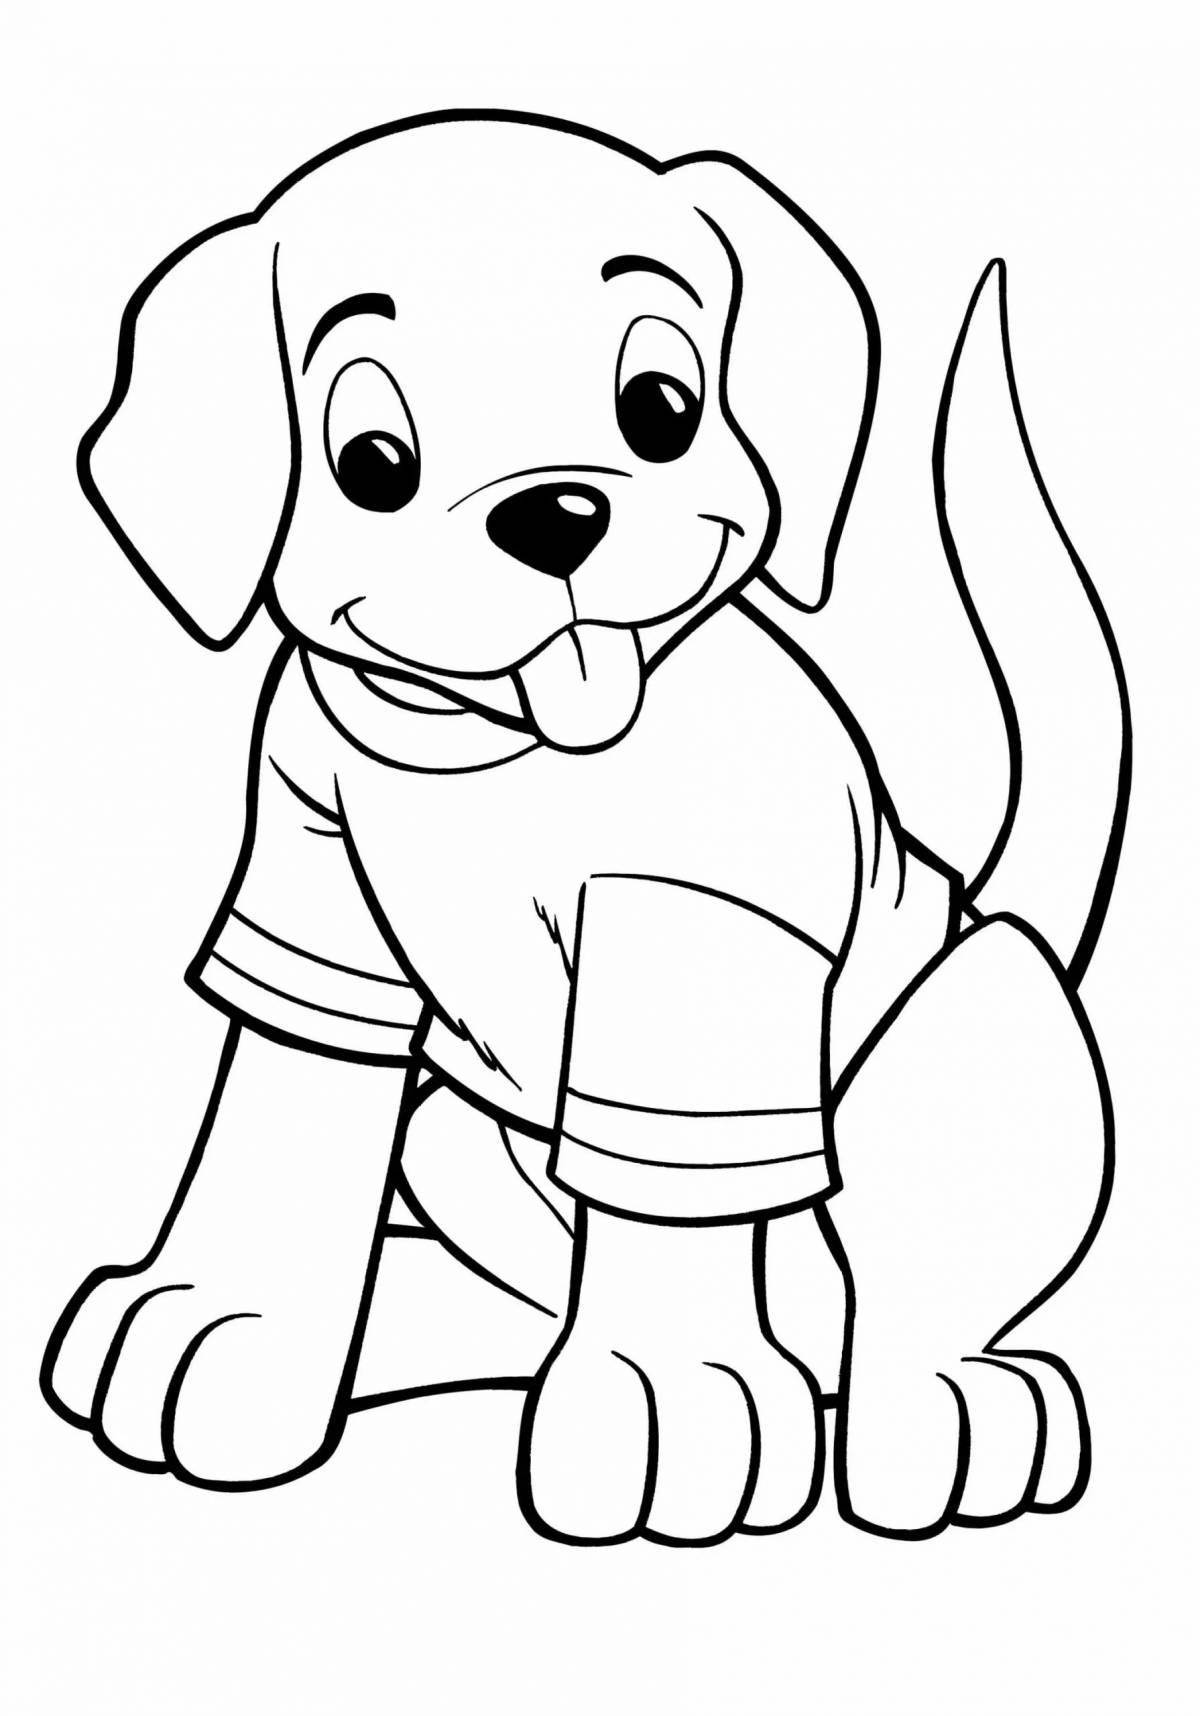 Adorable dog coloring book for children 4-5 years old